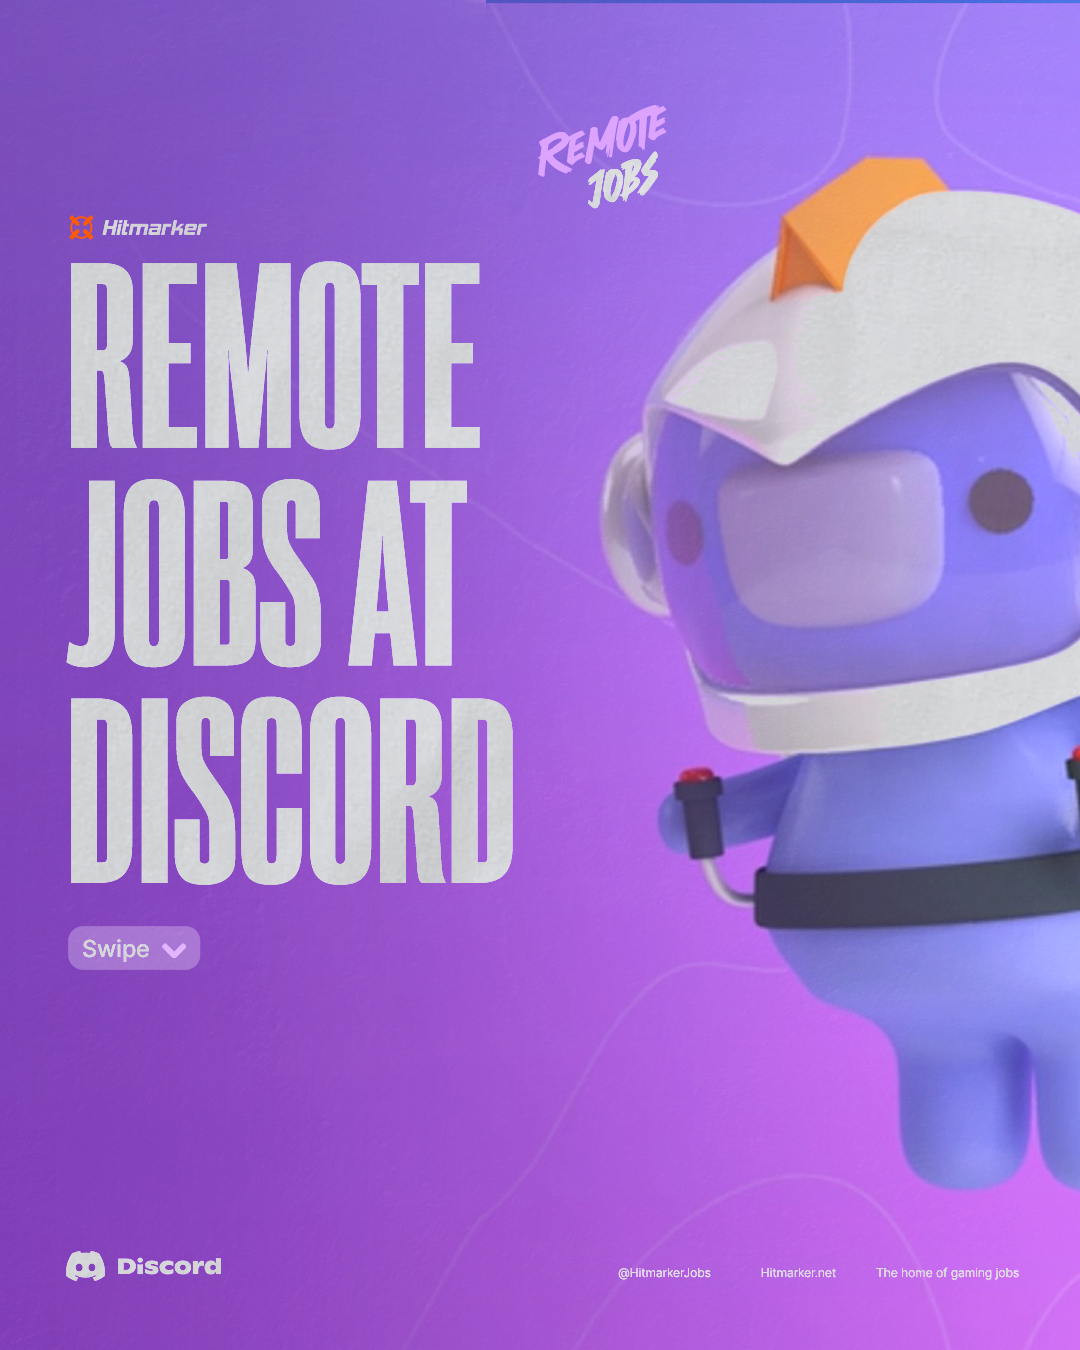 The complete list of gaming jobs